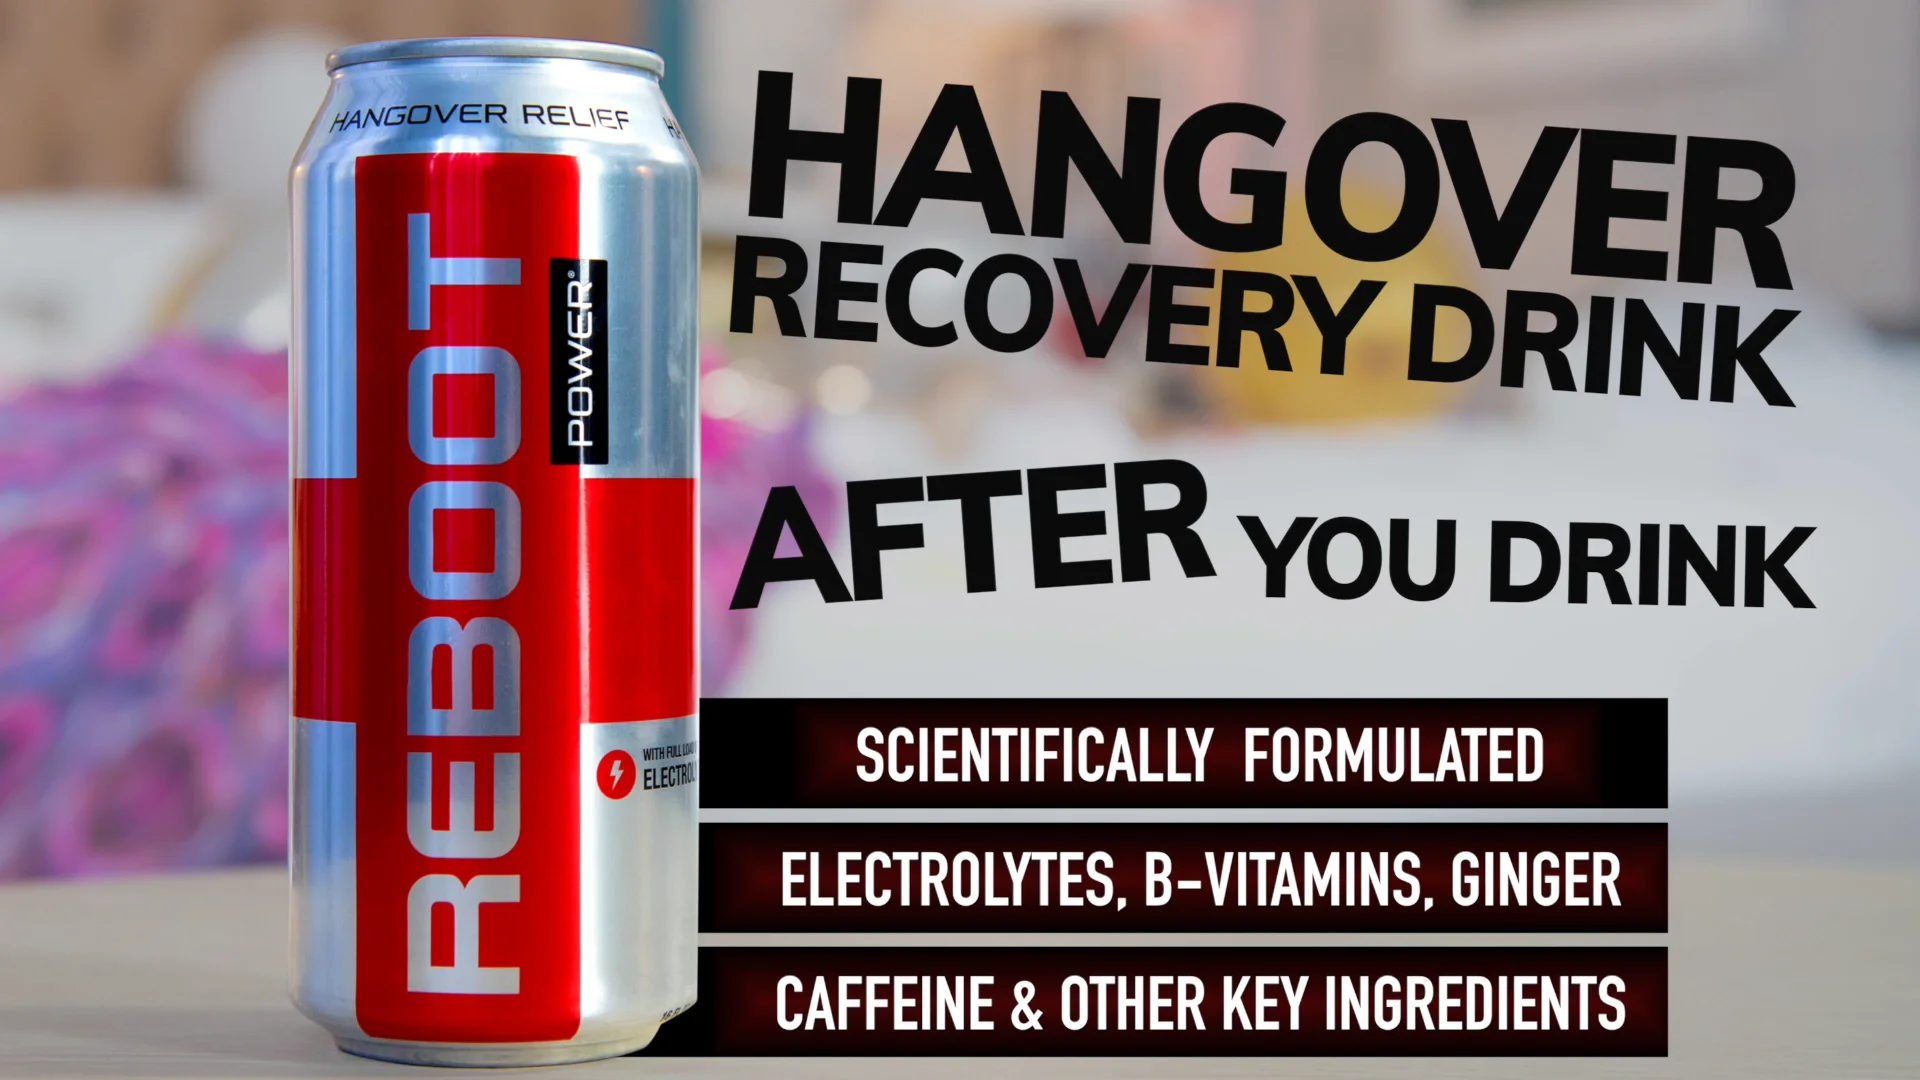 REBOOT Hangover Relief - Las Vegas Commercial Official Video on Vimeo